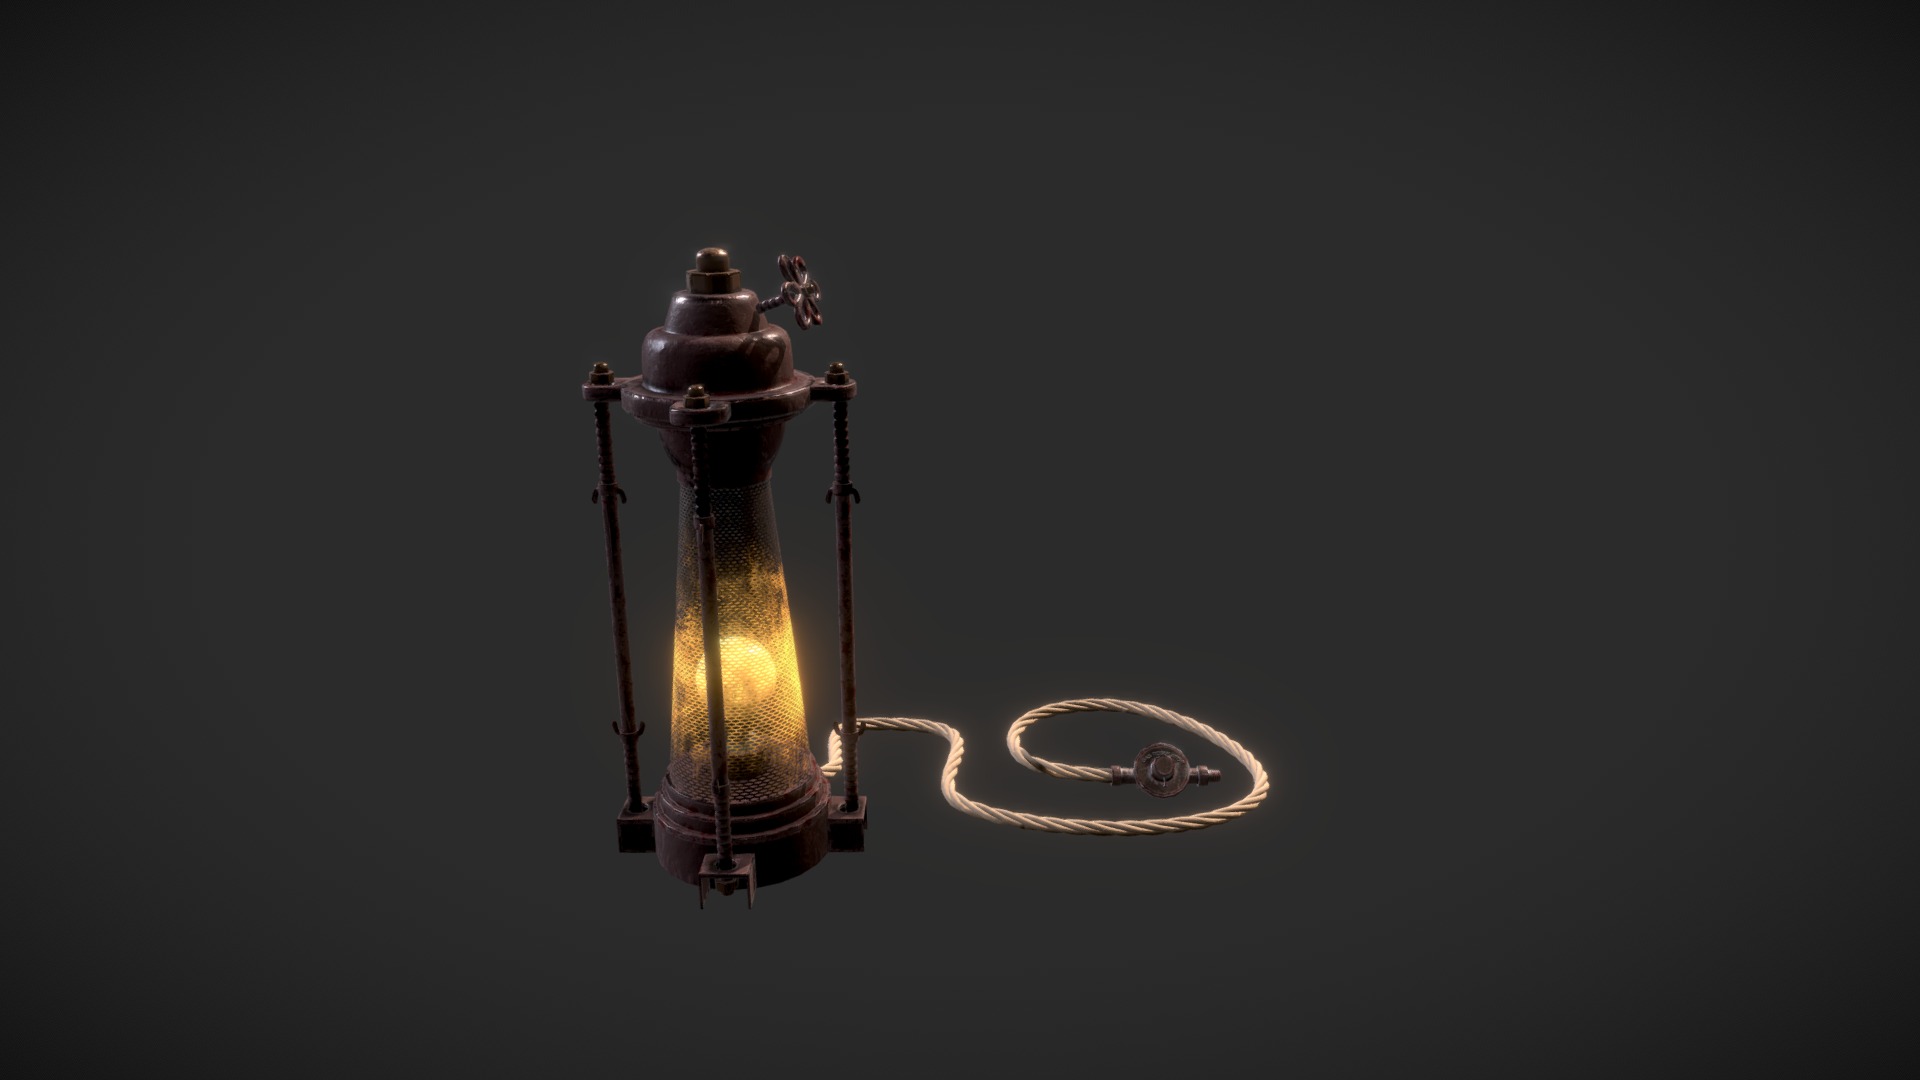 3D model SteamPunk Light_Product01 - This is a 3D model of the SteamPunk Light_Product01. The 3D model is about a light bulb with a flame.